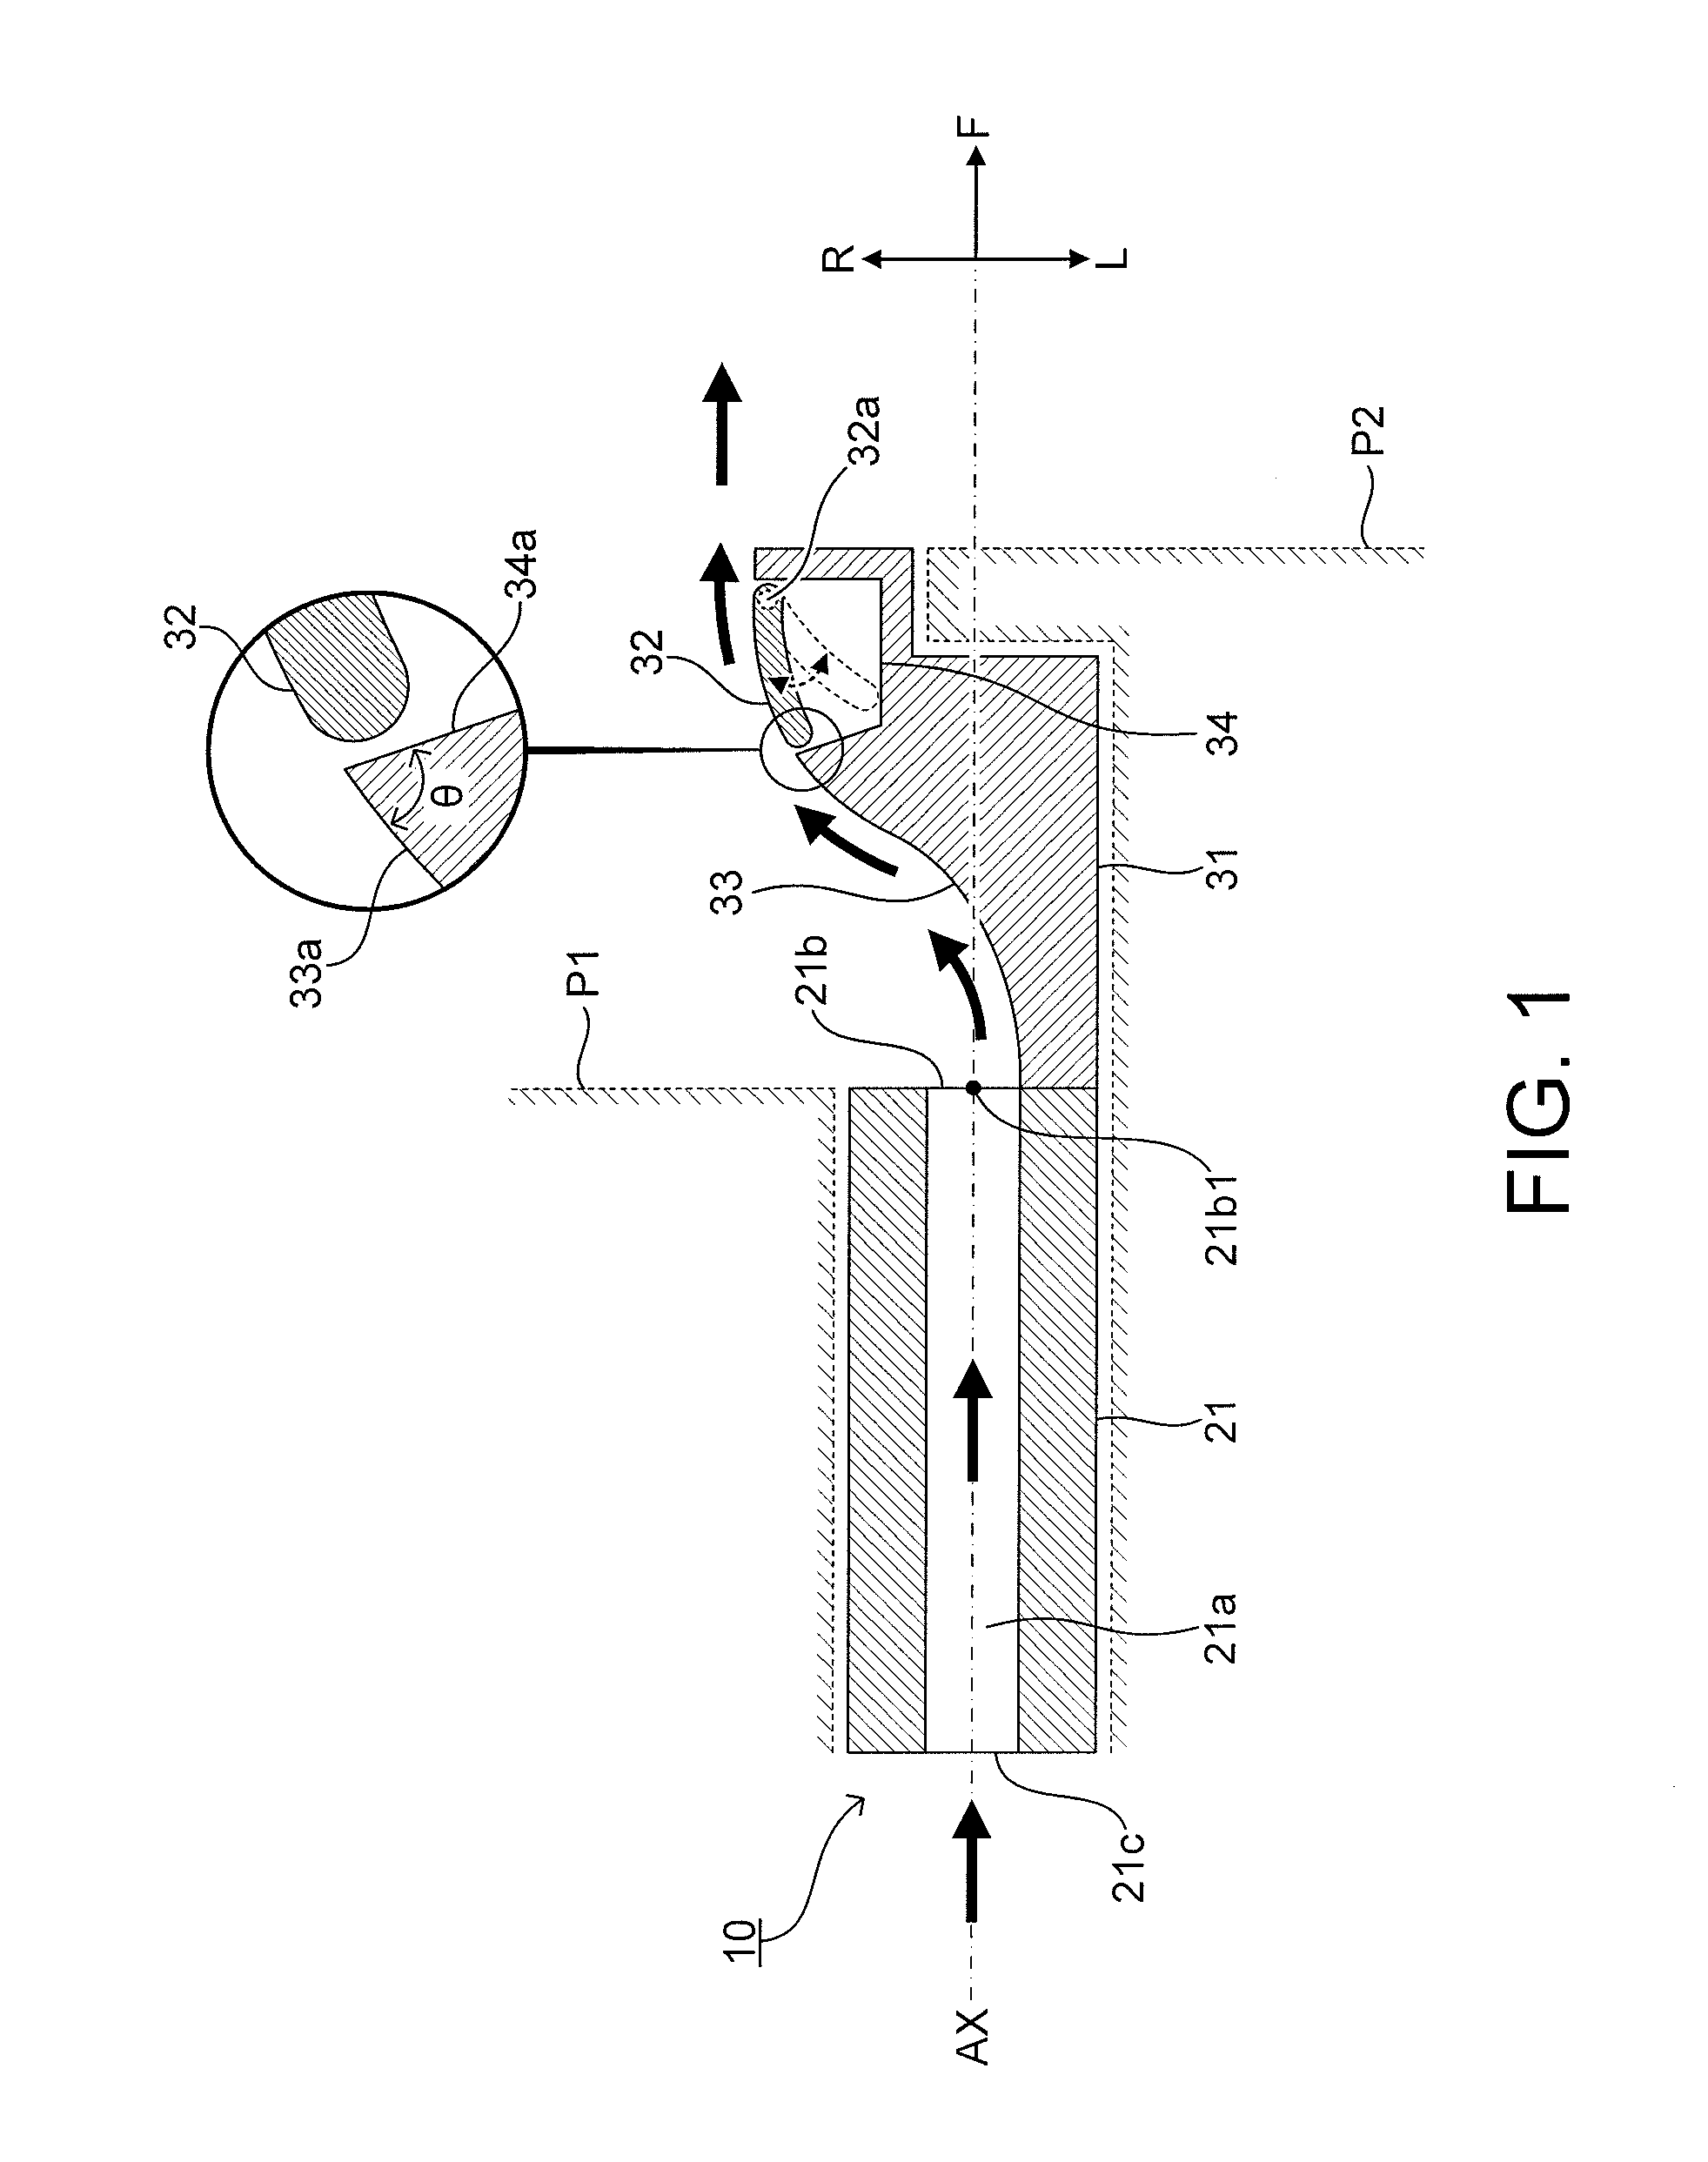 Air blowing device